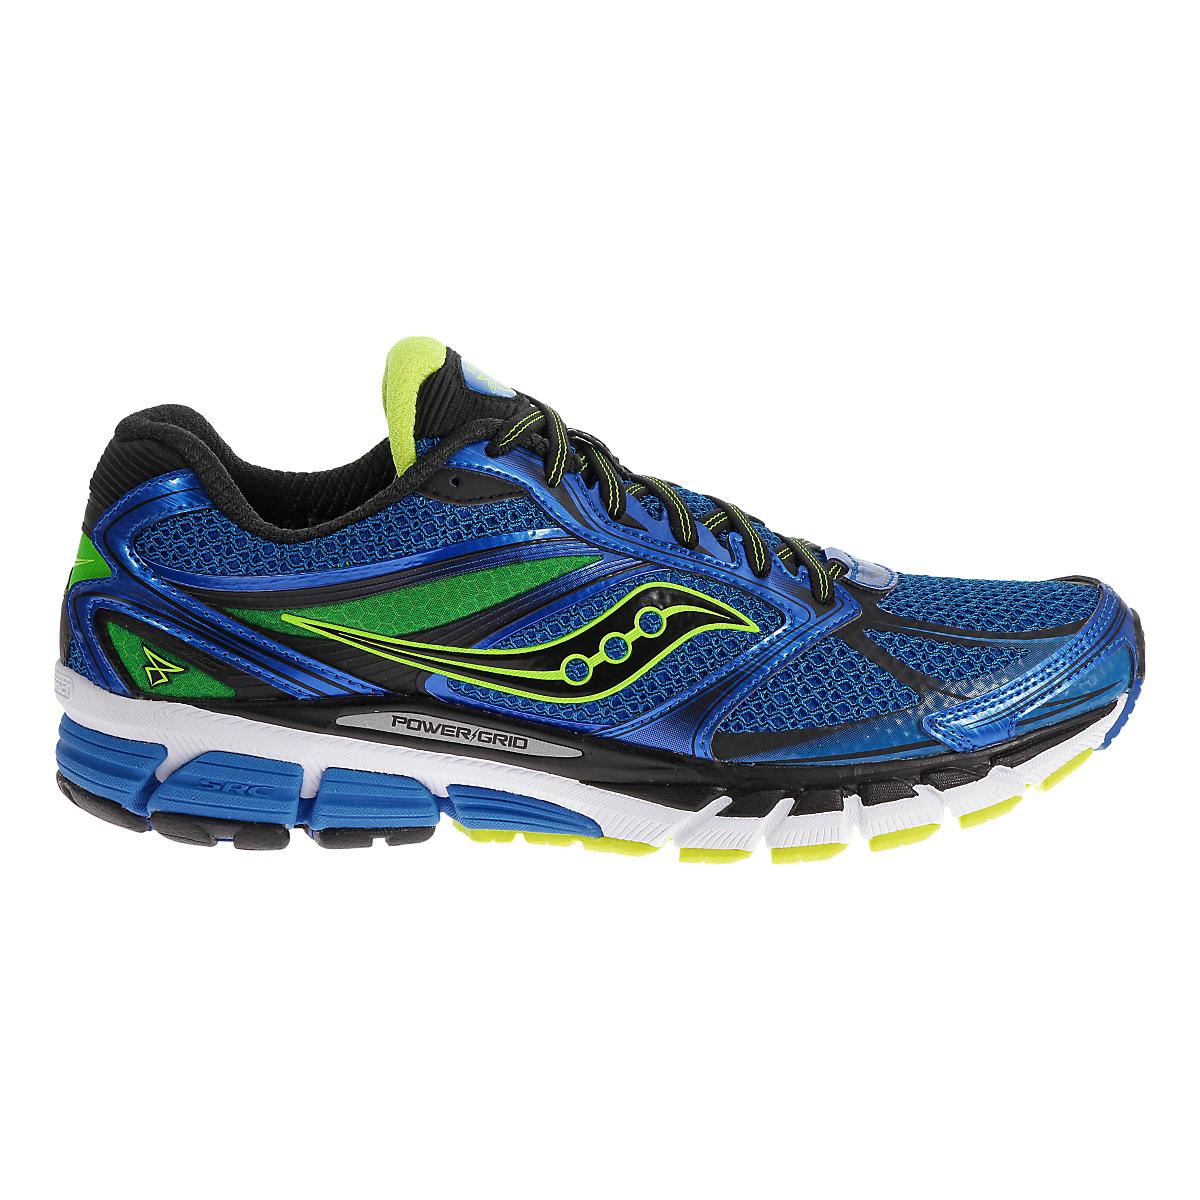 Mens Saucony Guide 9 Running Shoe at Road Runner Sports